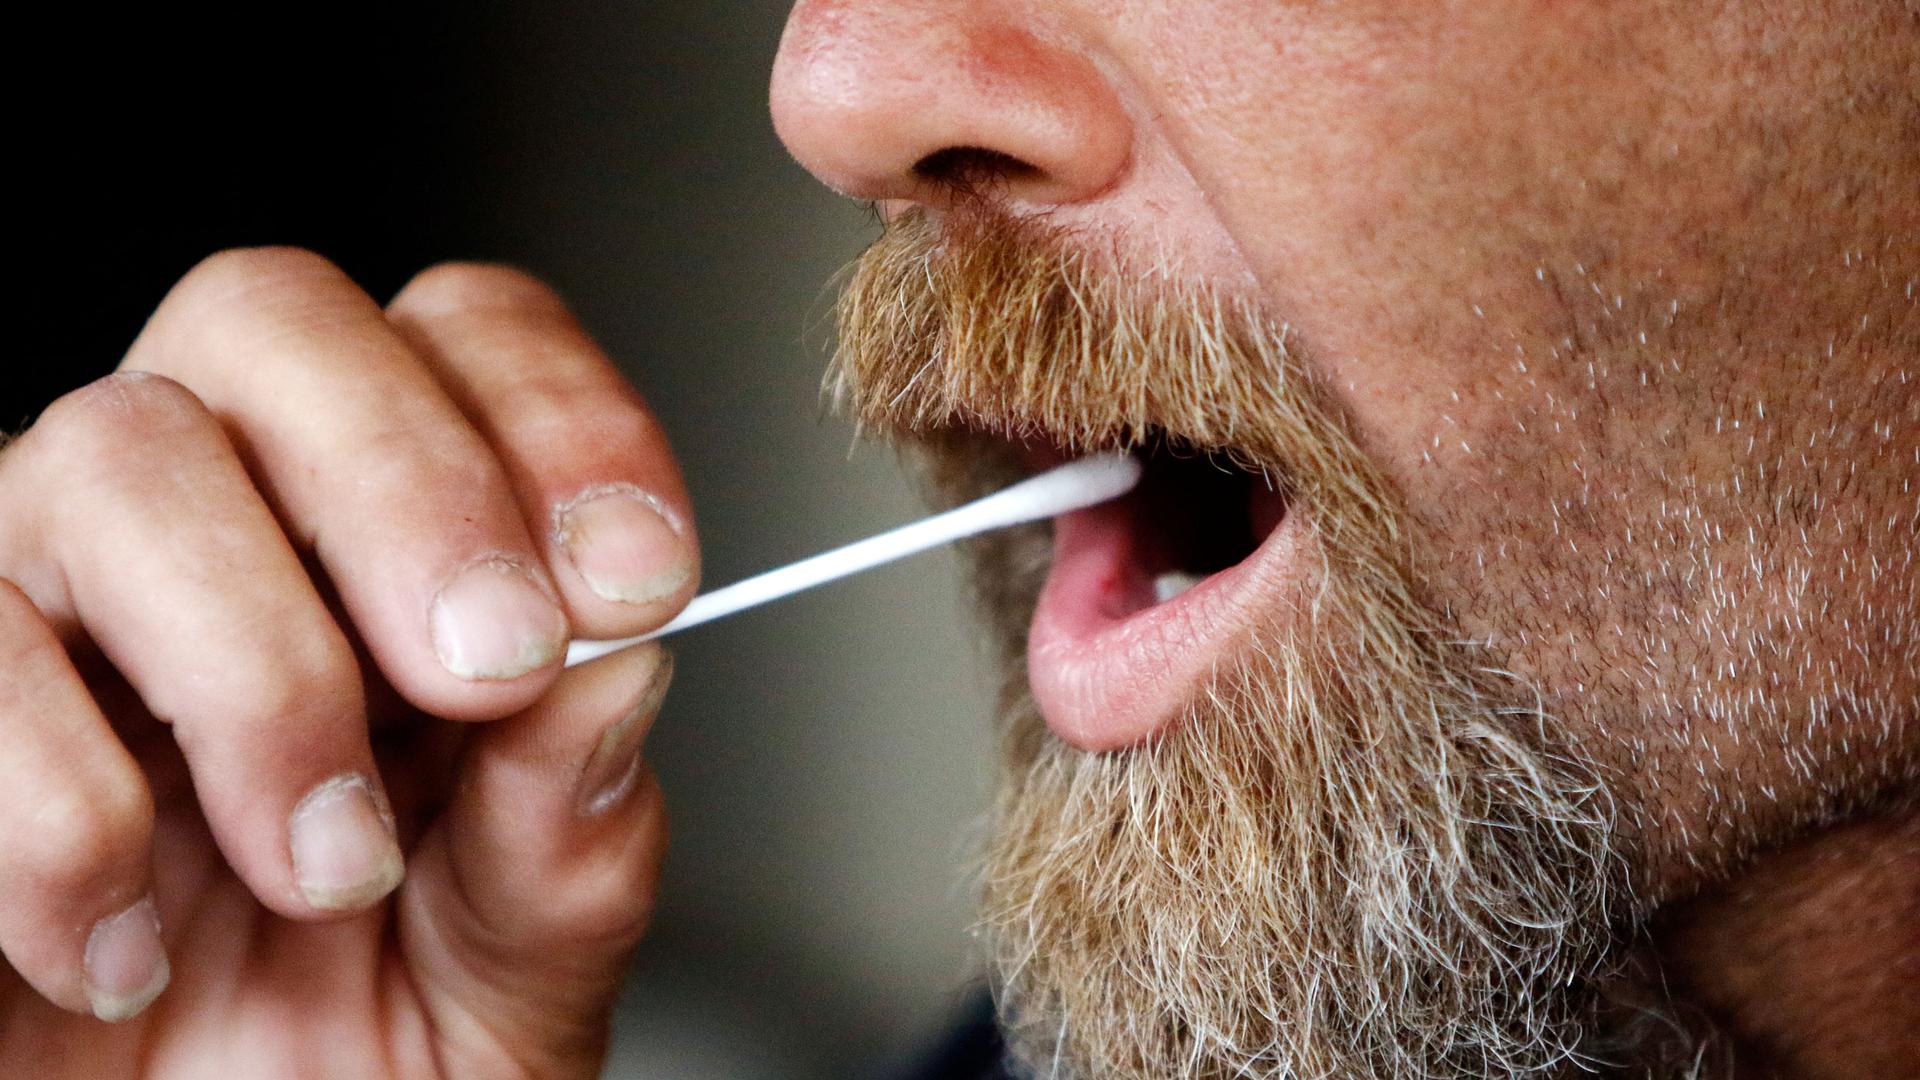 a close up of a man with a beard swabbing his mouth.